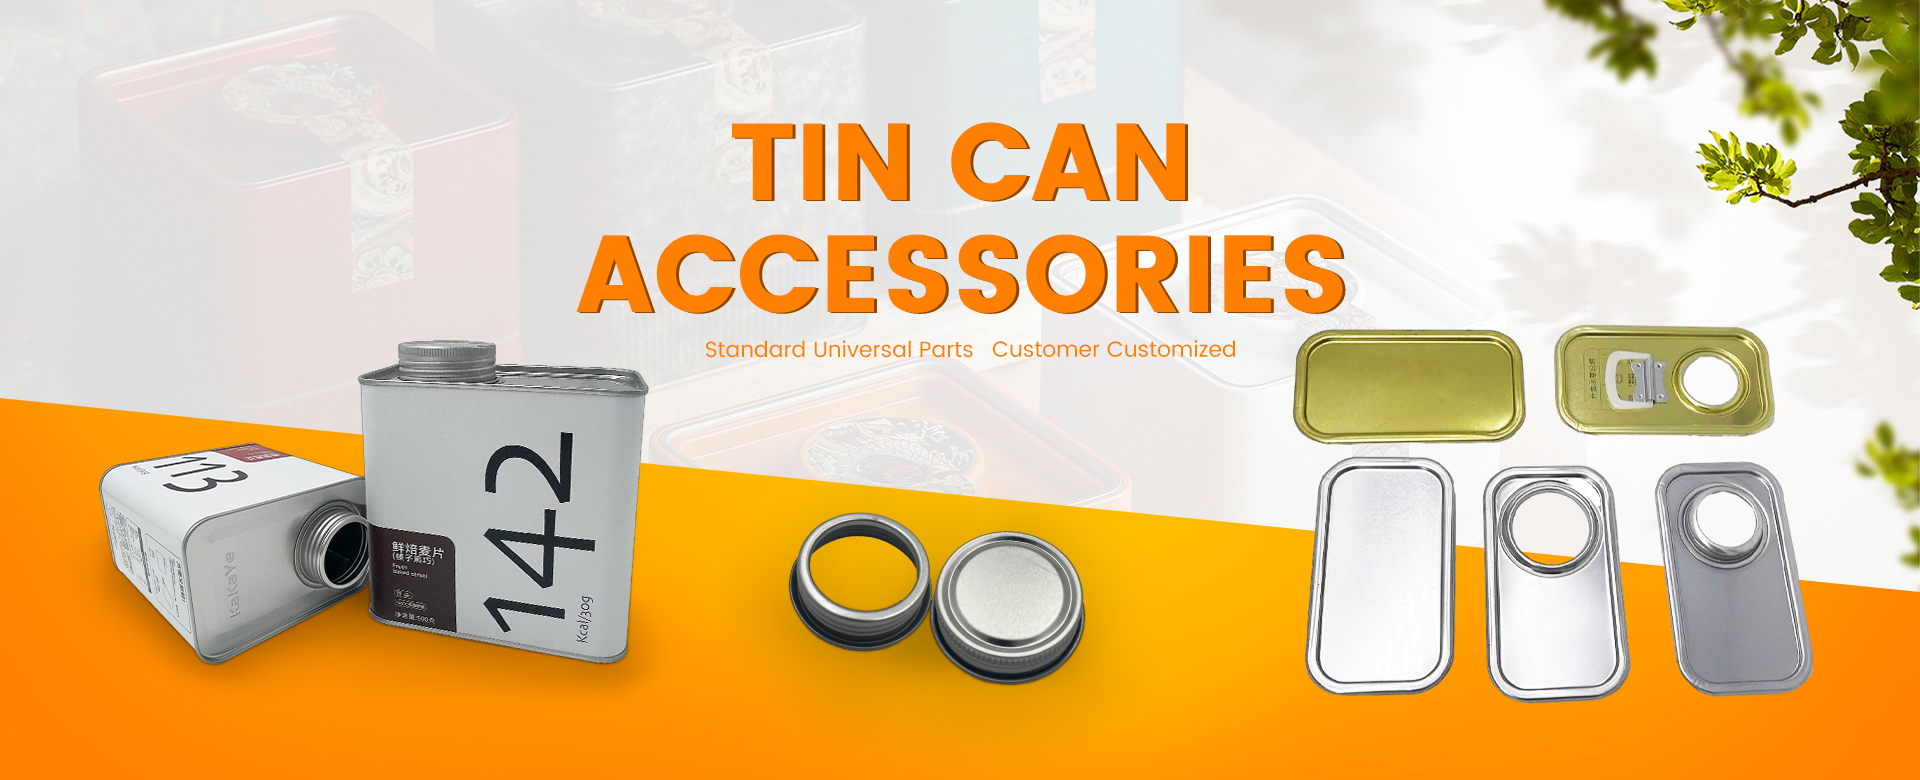 Tin Can Accessories